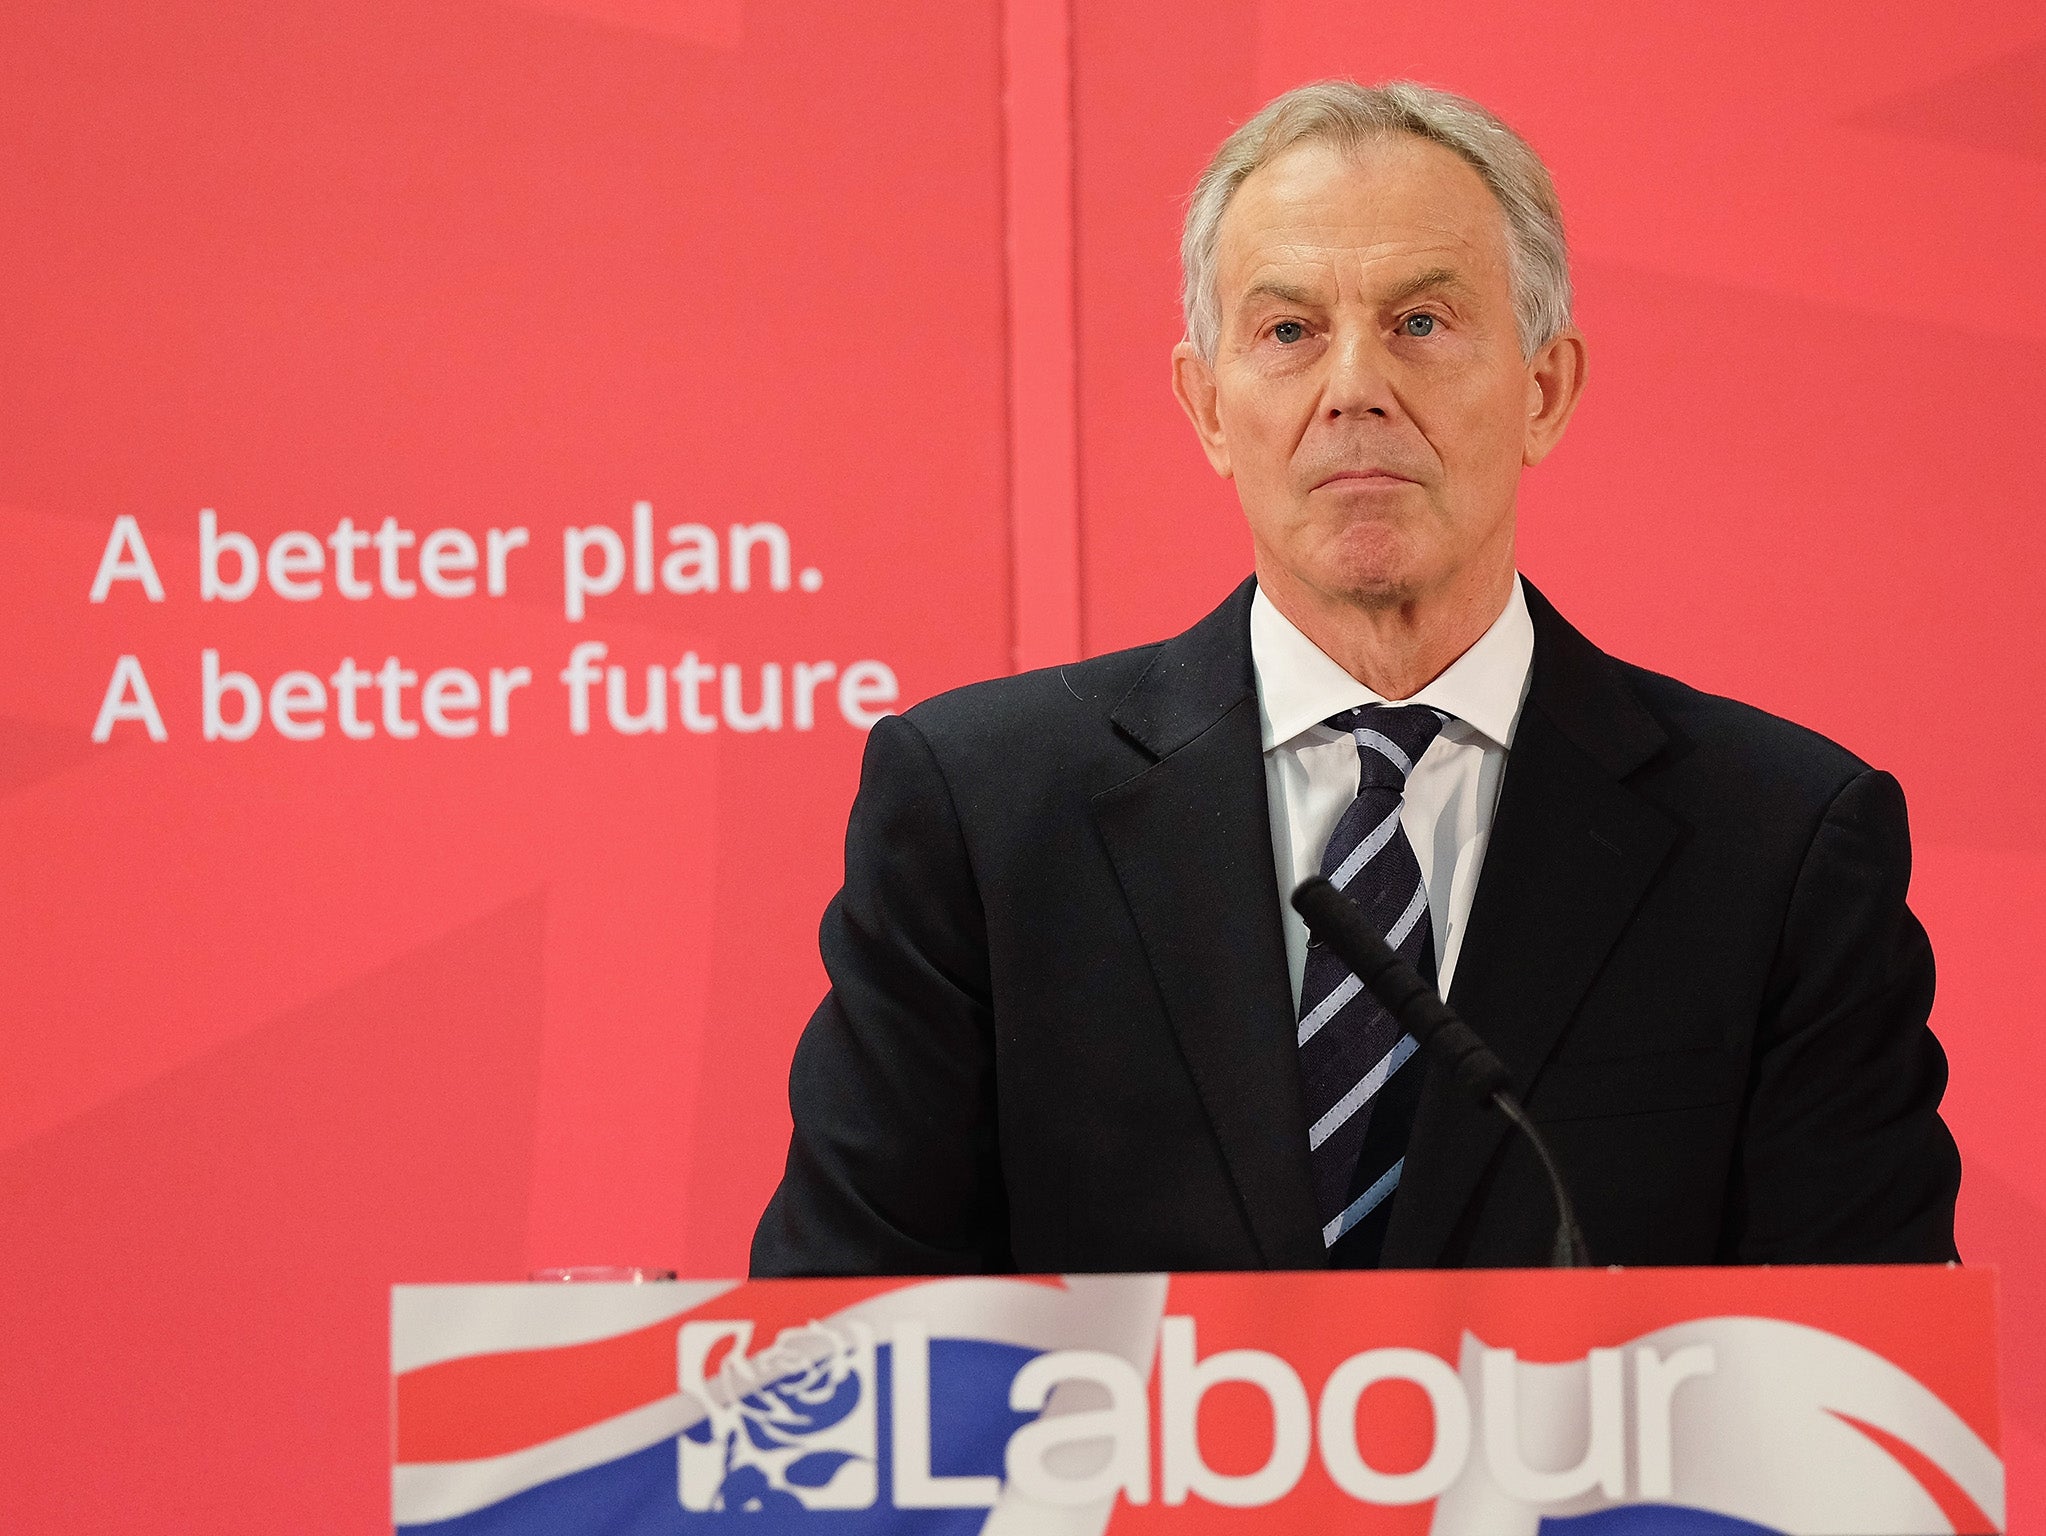 Mr Blair reportedly warned dissenting MPs at the end of 2015